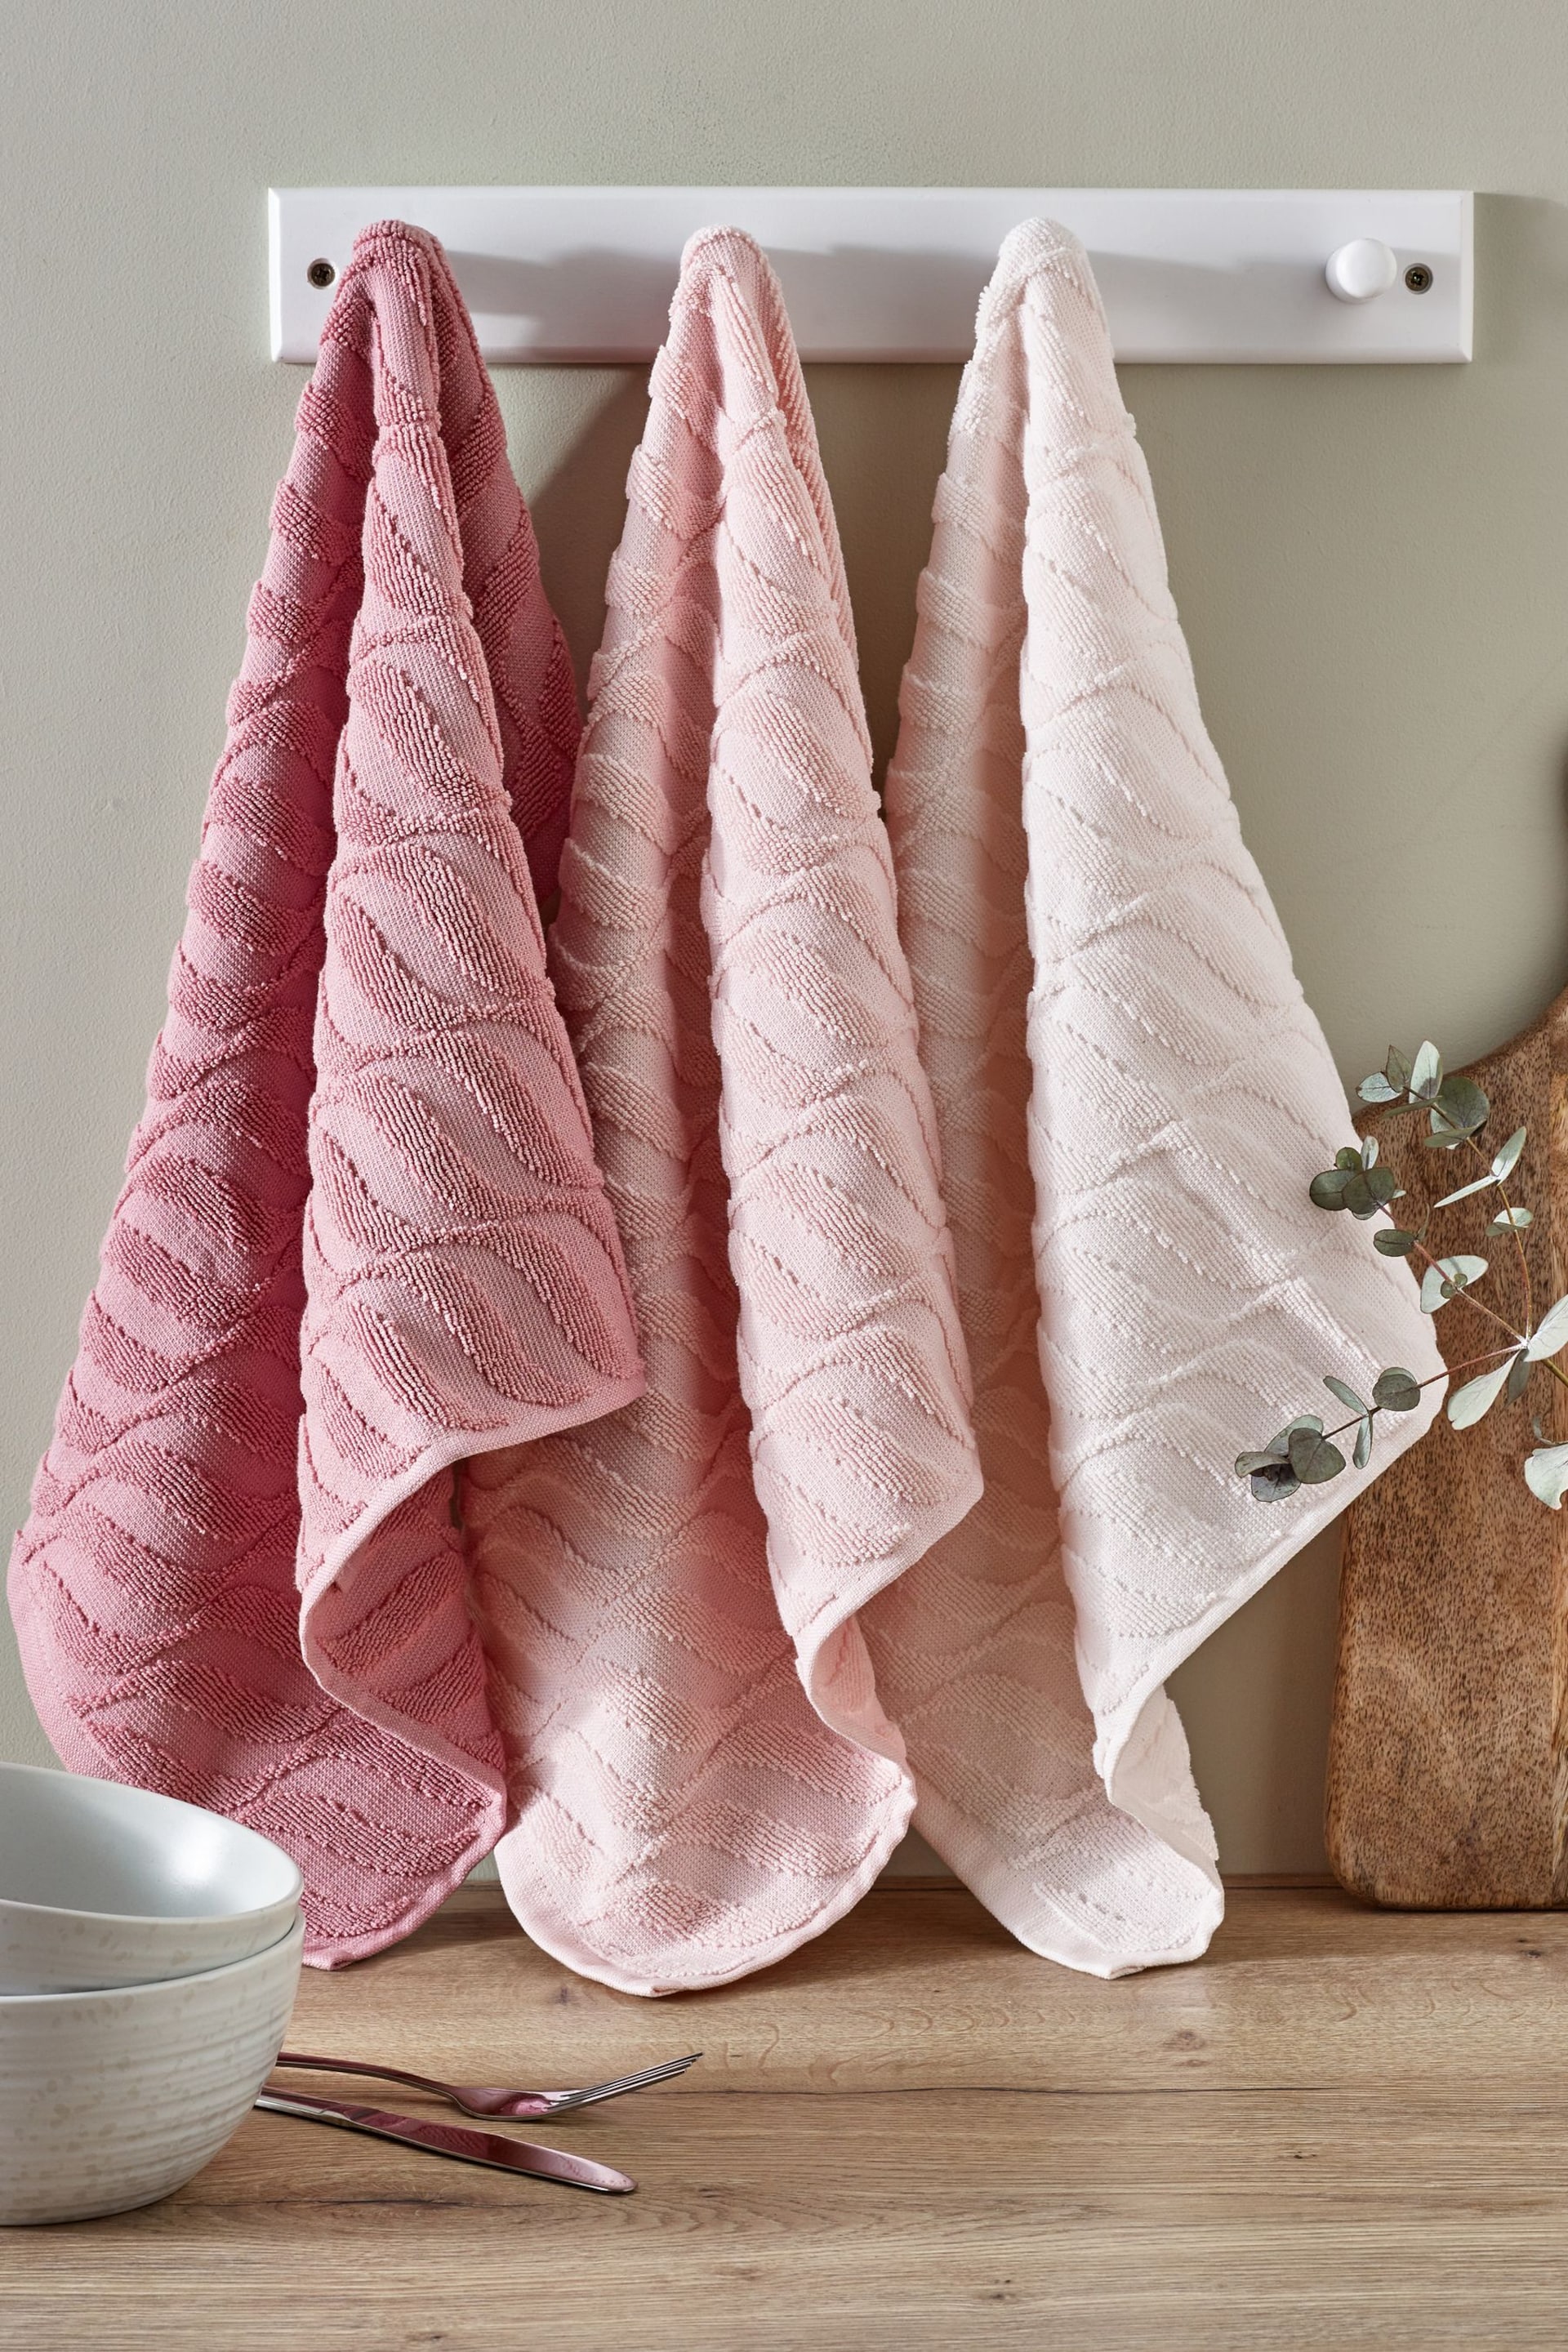 Set of 3 Pink Terry Tea Towels - Image 2 of 4